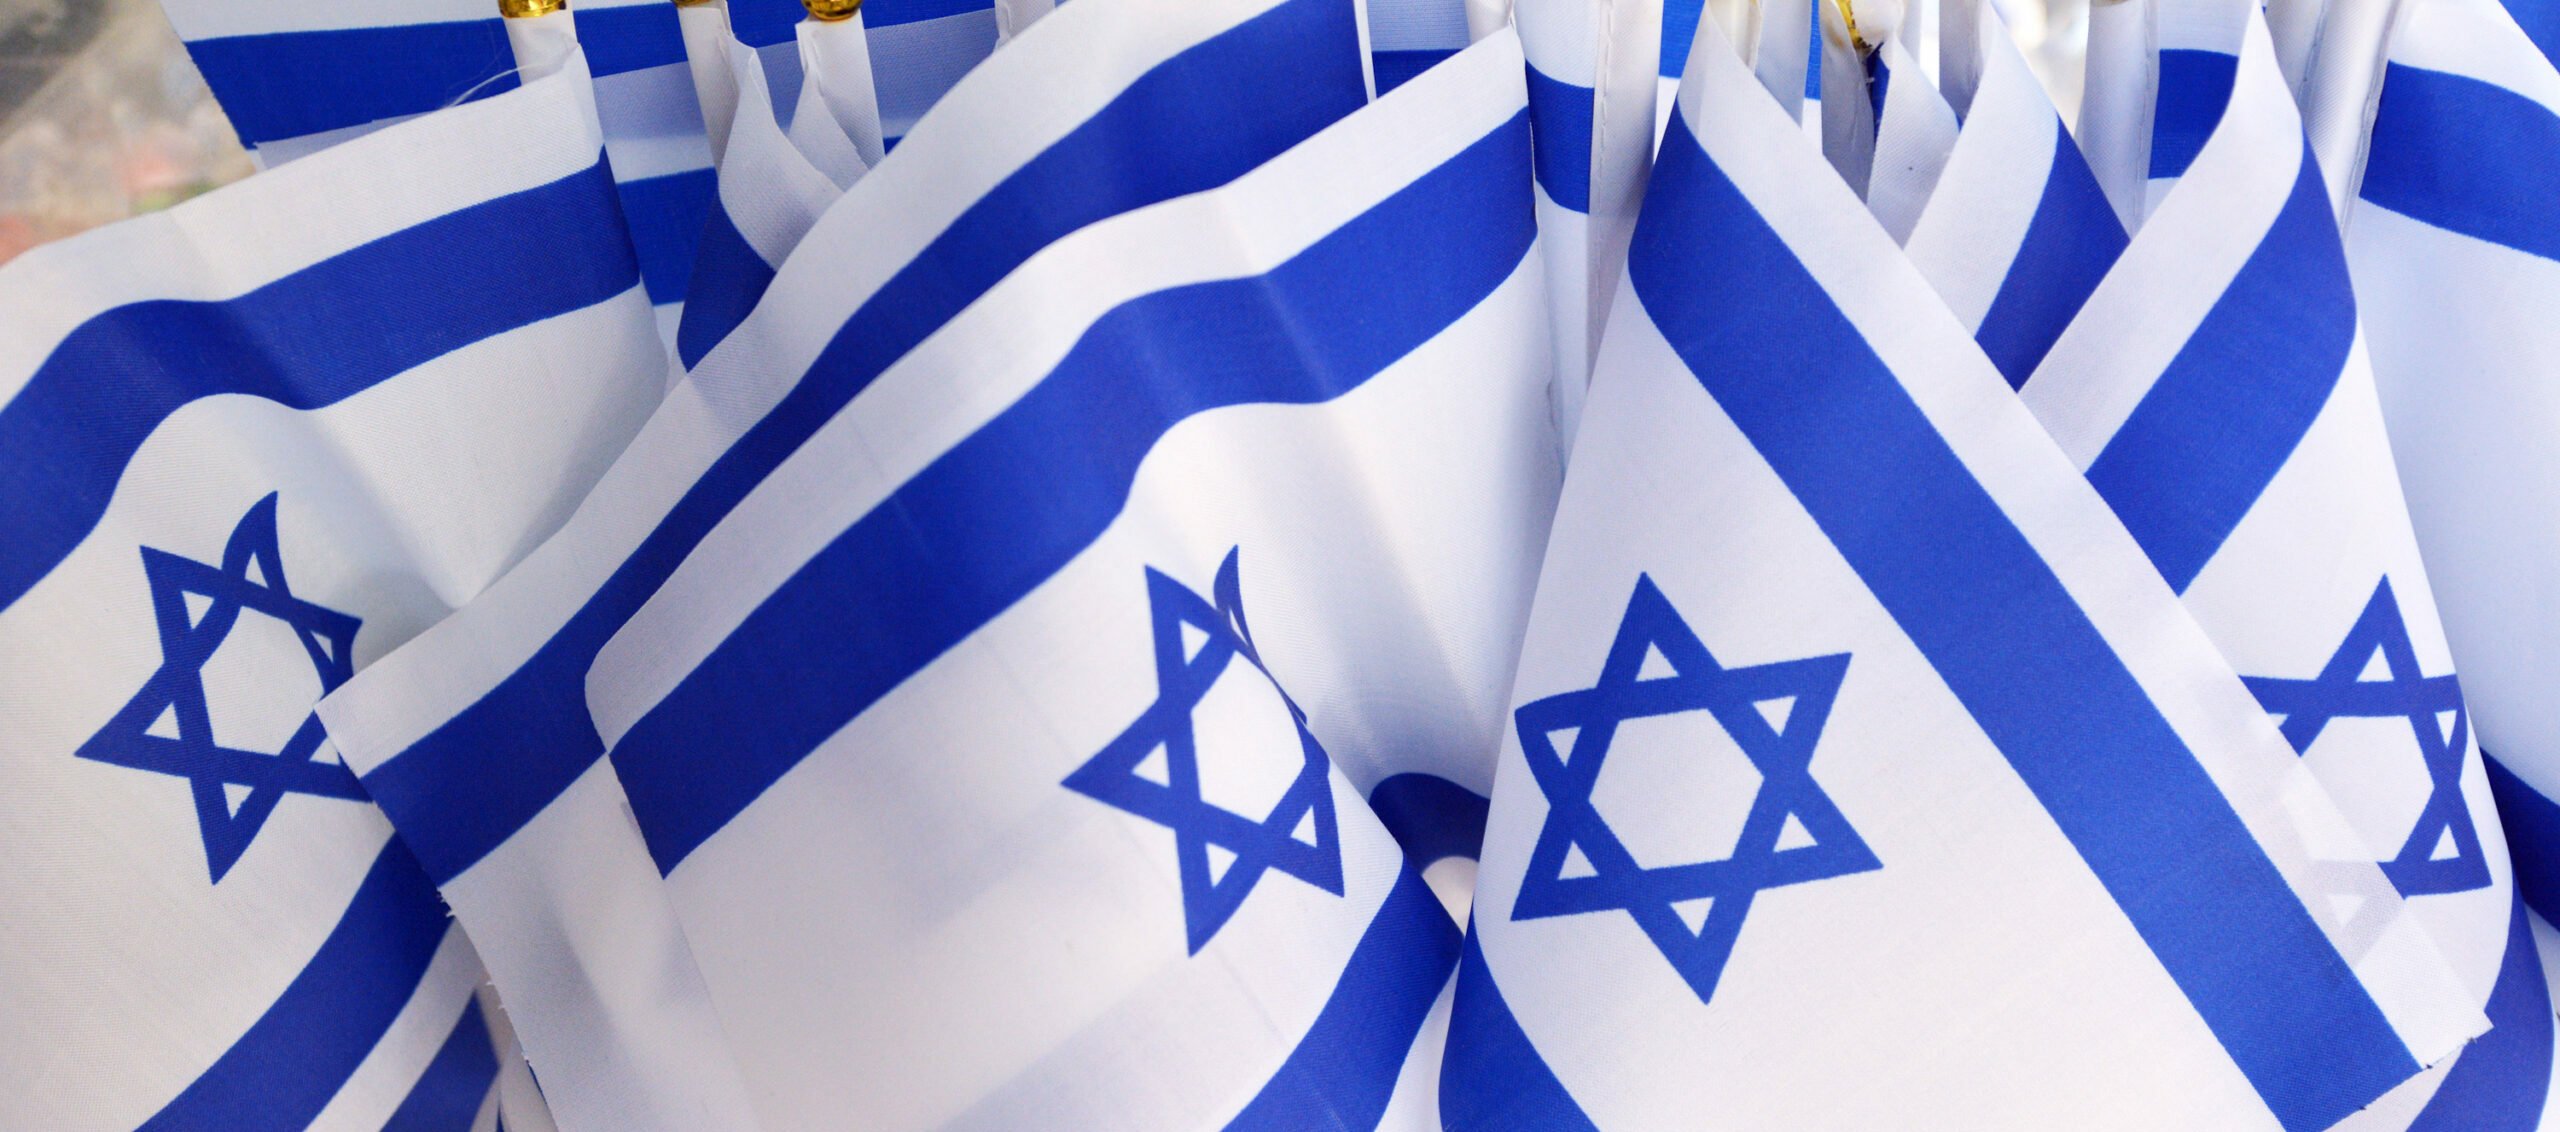 Israel national flags